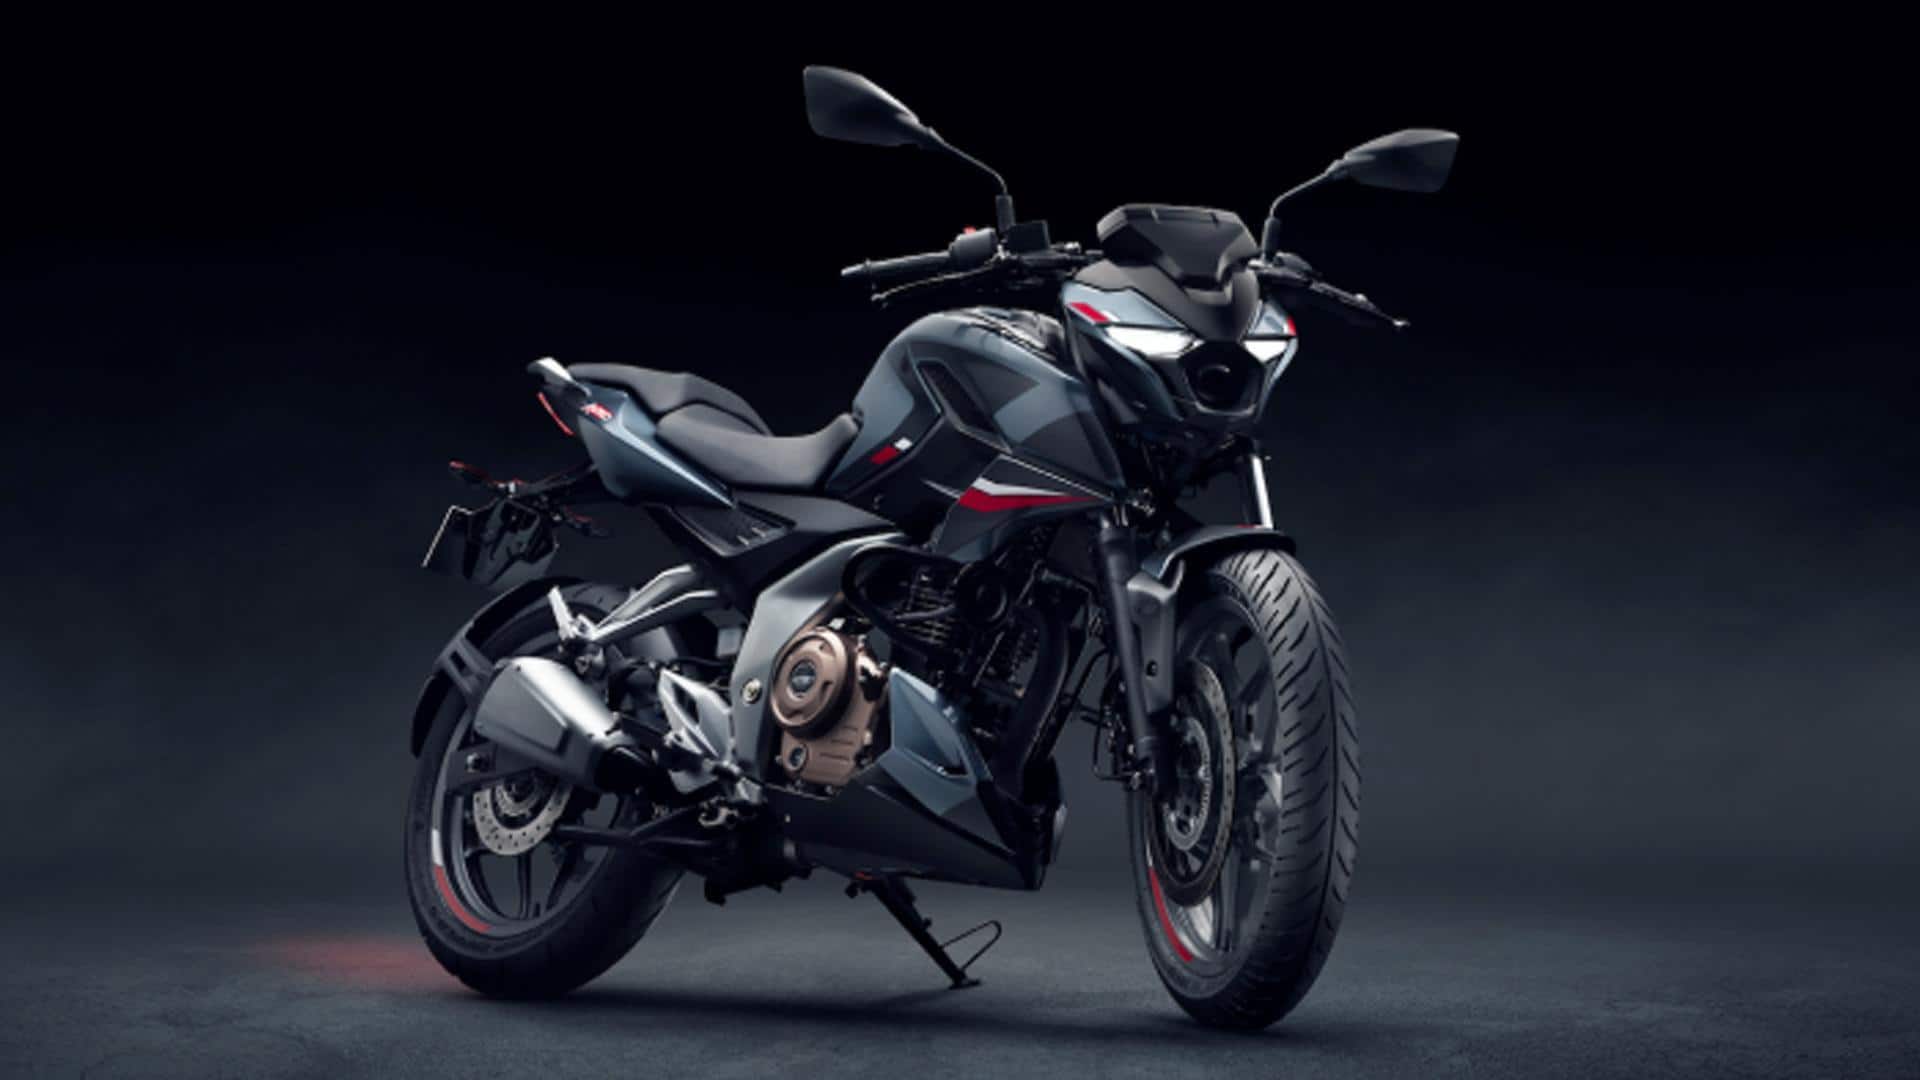 Bajaj Pulsar NS400 to arrive in March: What to expect